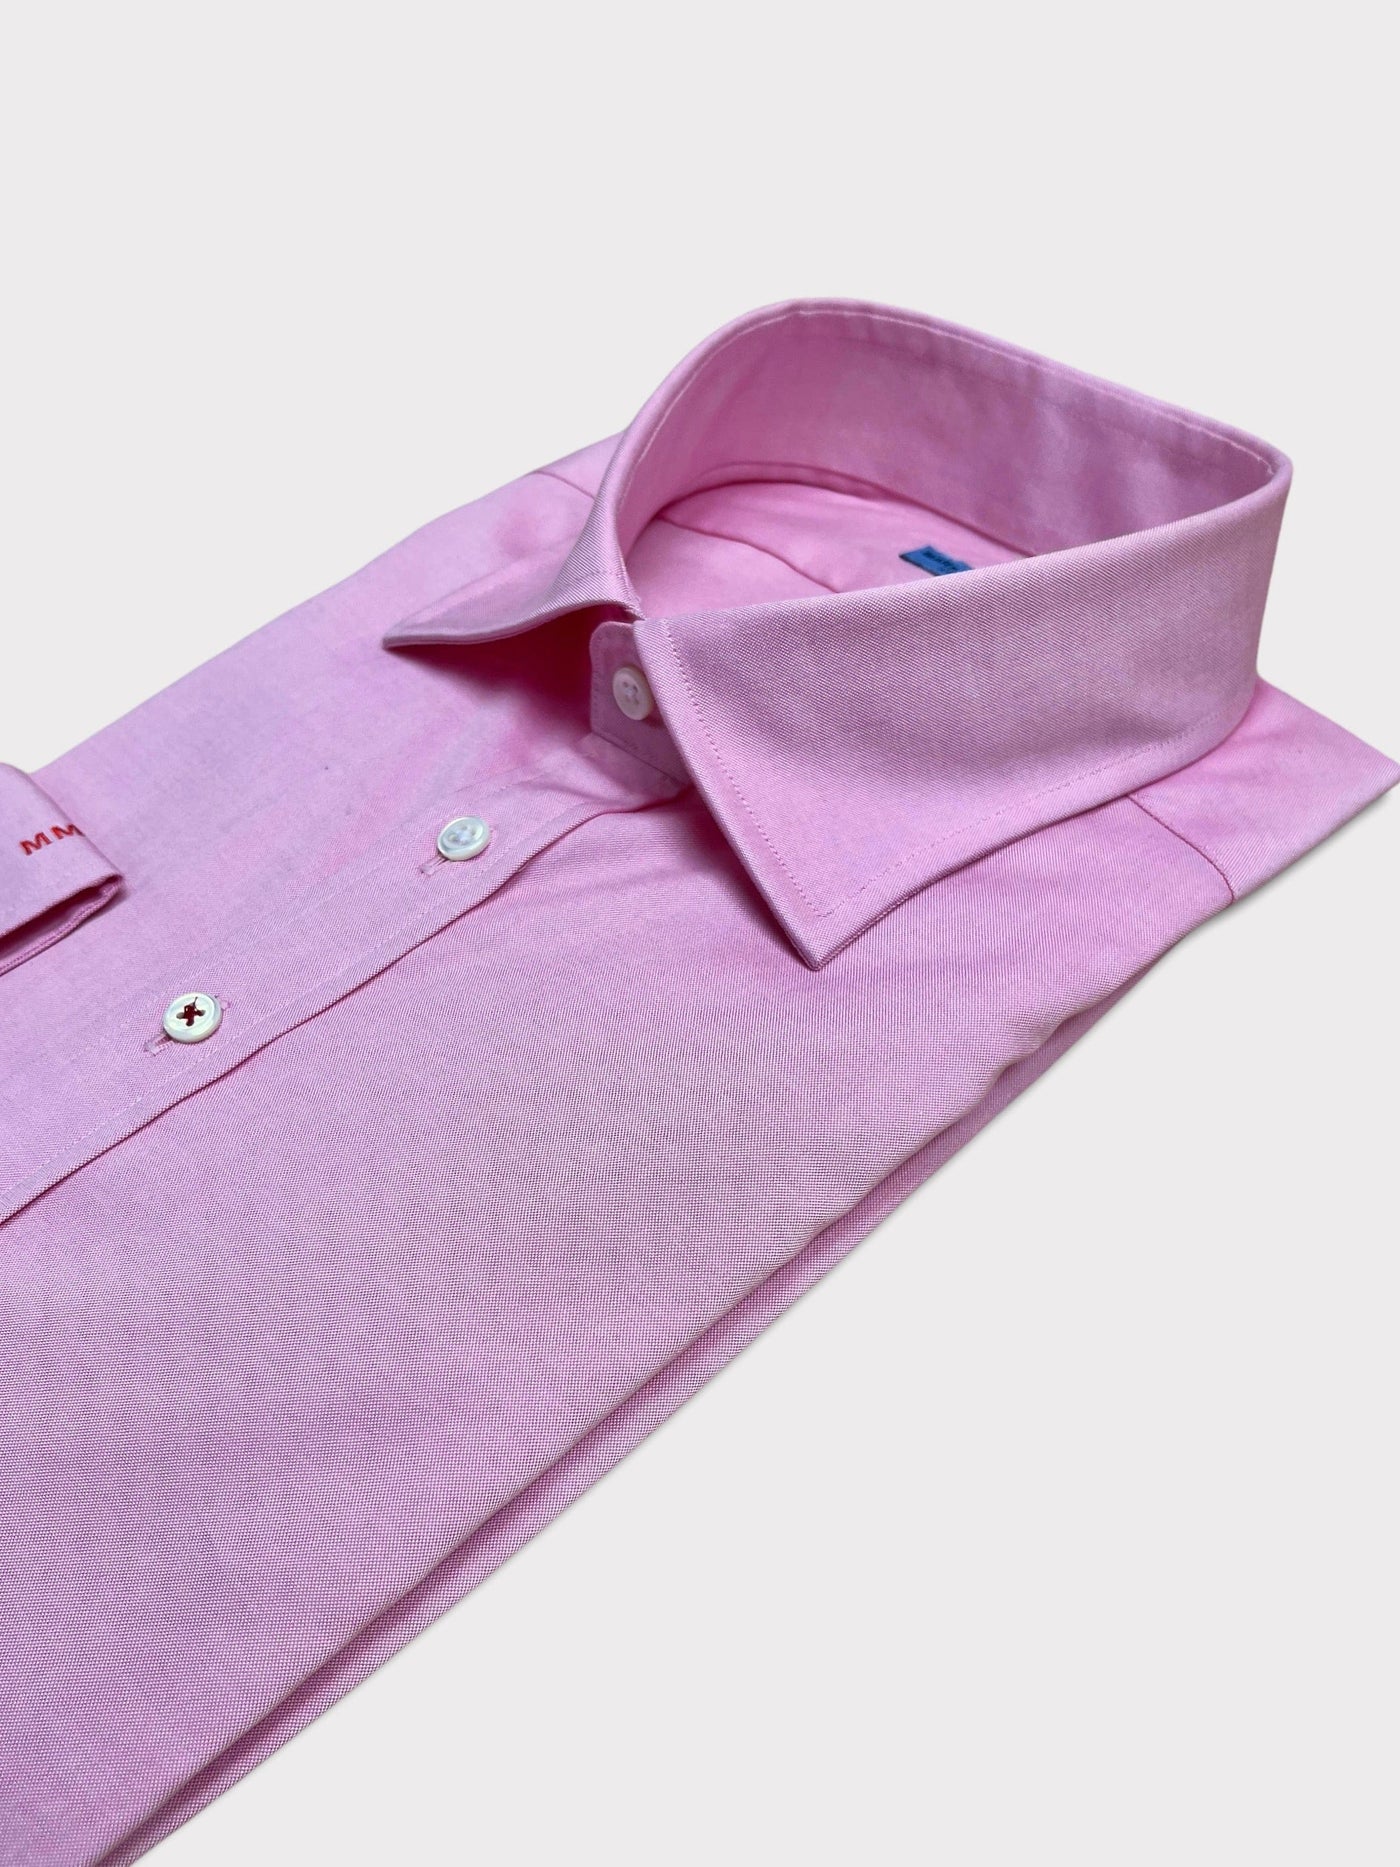 Chemise Pinpoint Rose